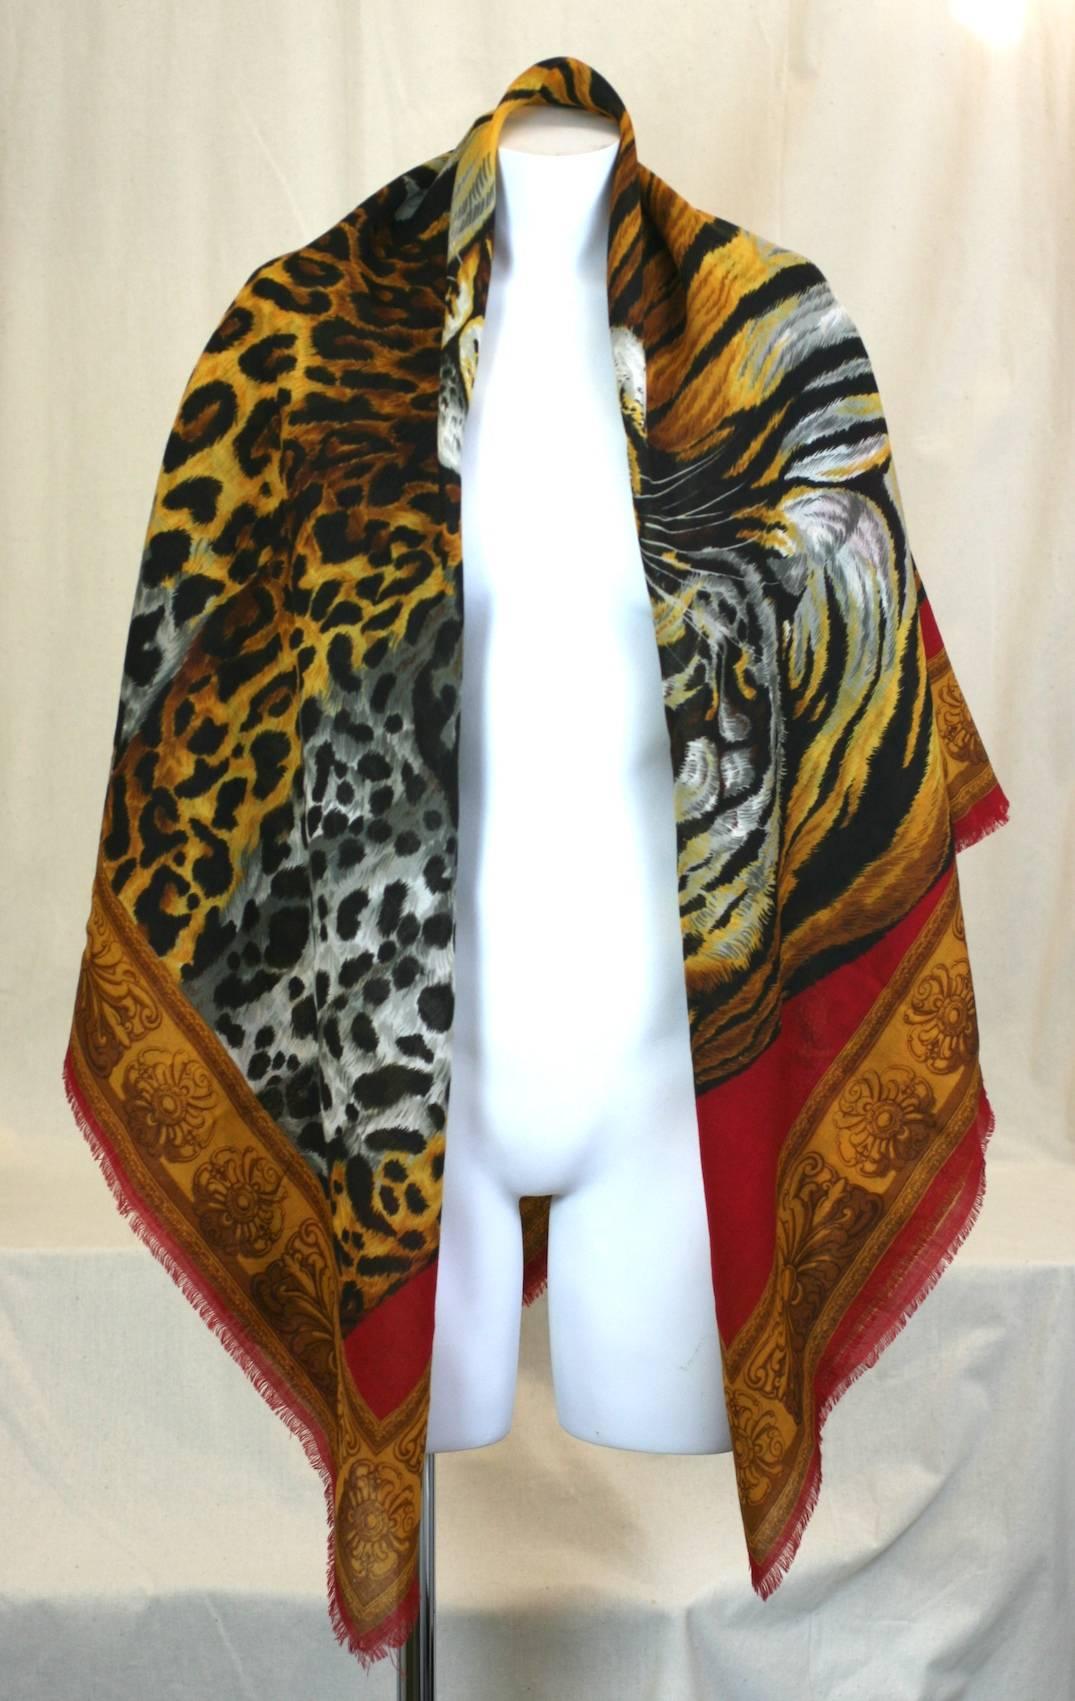 Massive and soft wool challis Shawl printed with Wild Cats (leopard and tiger).
Unlabeled but likely Italian from the high quality of the wool and printing. 1990's.
52